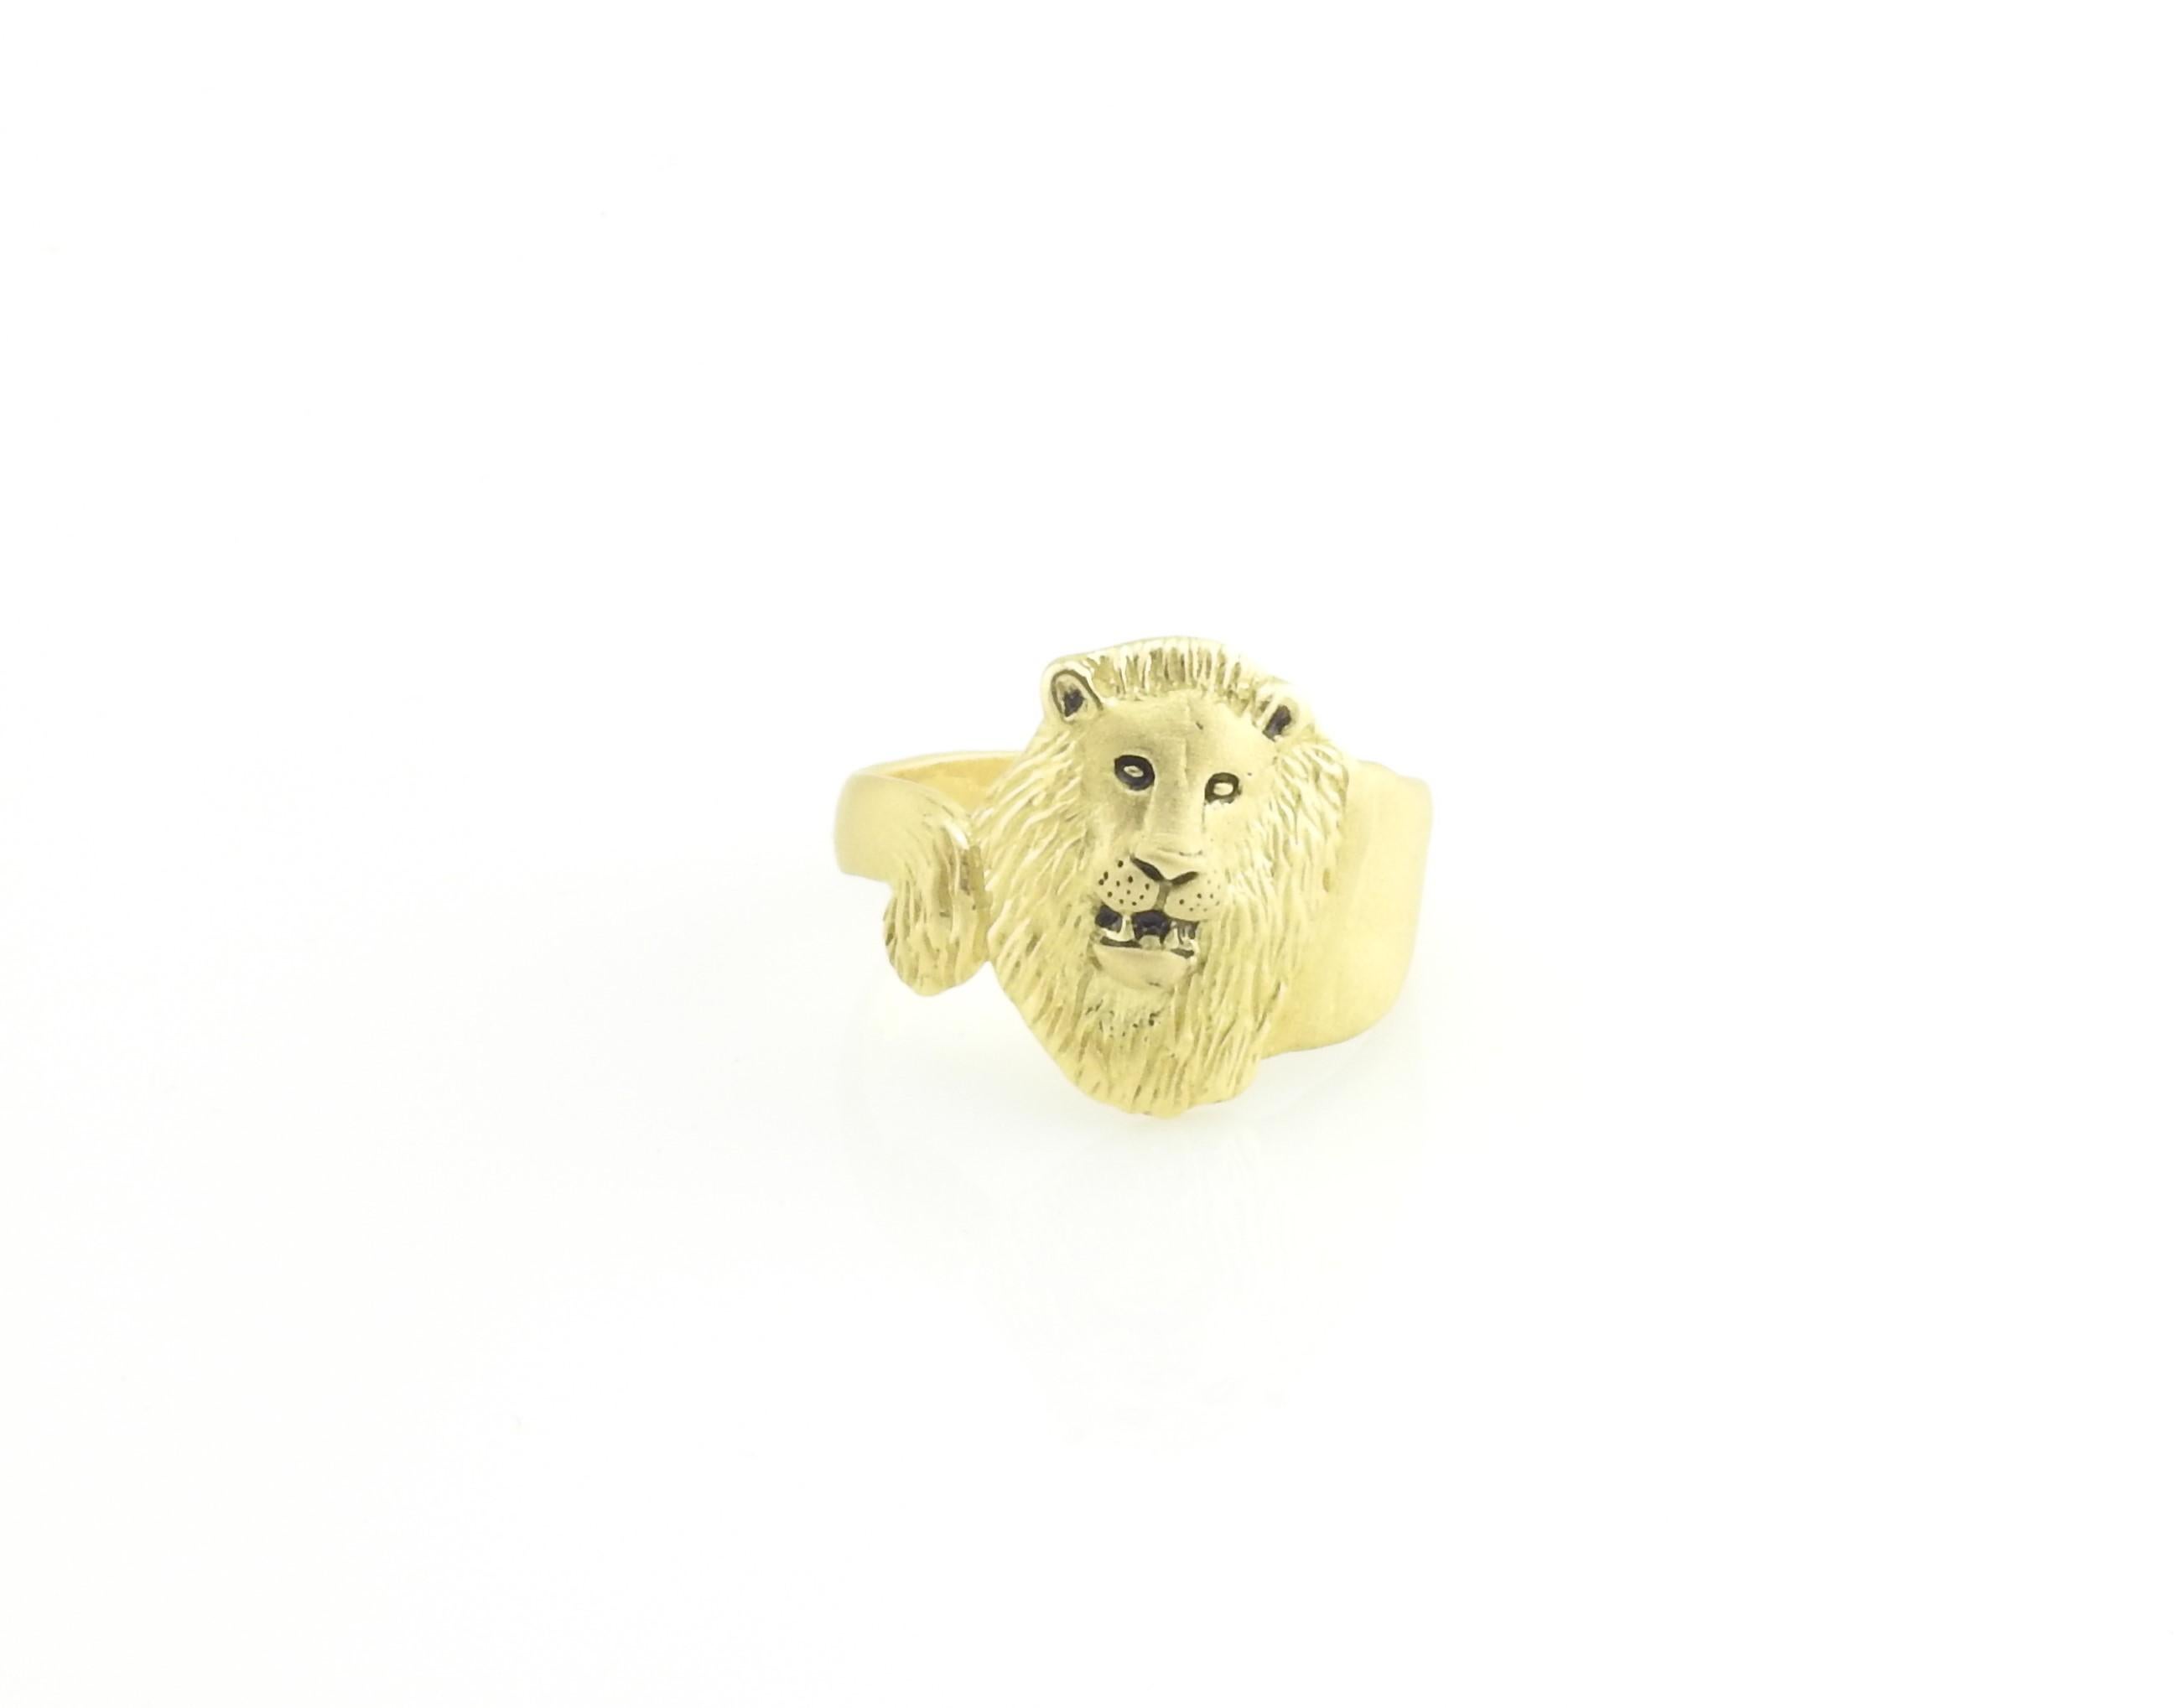 Barclay Hill 18 Karat Yellow Gold Lion Ring Size 8

This stunning ring features a majestic lion crafted in beautifully detailed 18K yellow gold.

Barclay Hill jewelry is handmade on the island of Maui.

Width: 16 mm.
Shank: 3 mm

Ring Size: